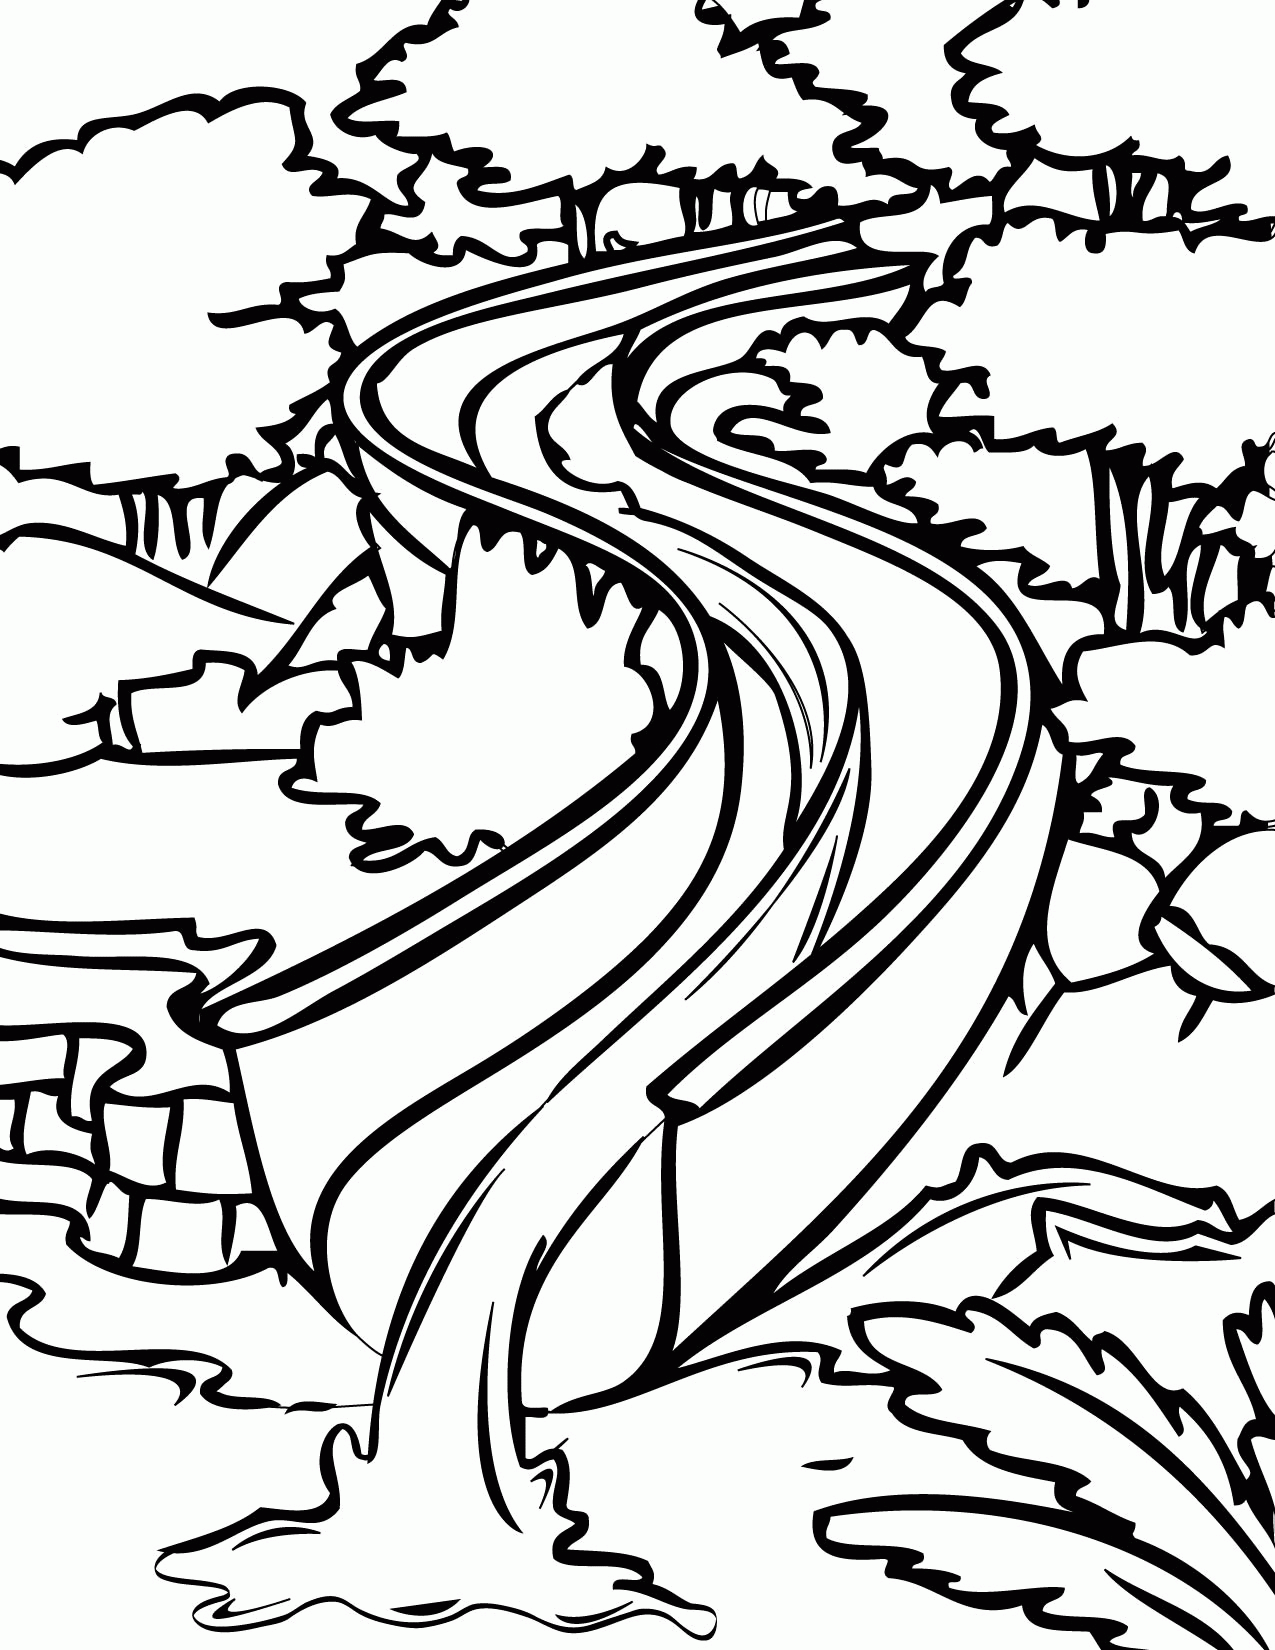 Water Slide Coloring Page - Handipoints